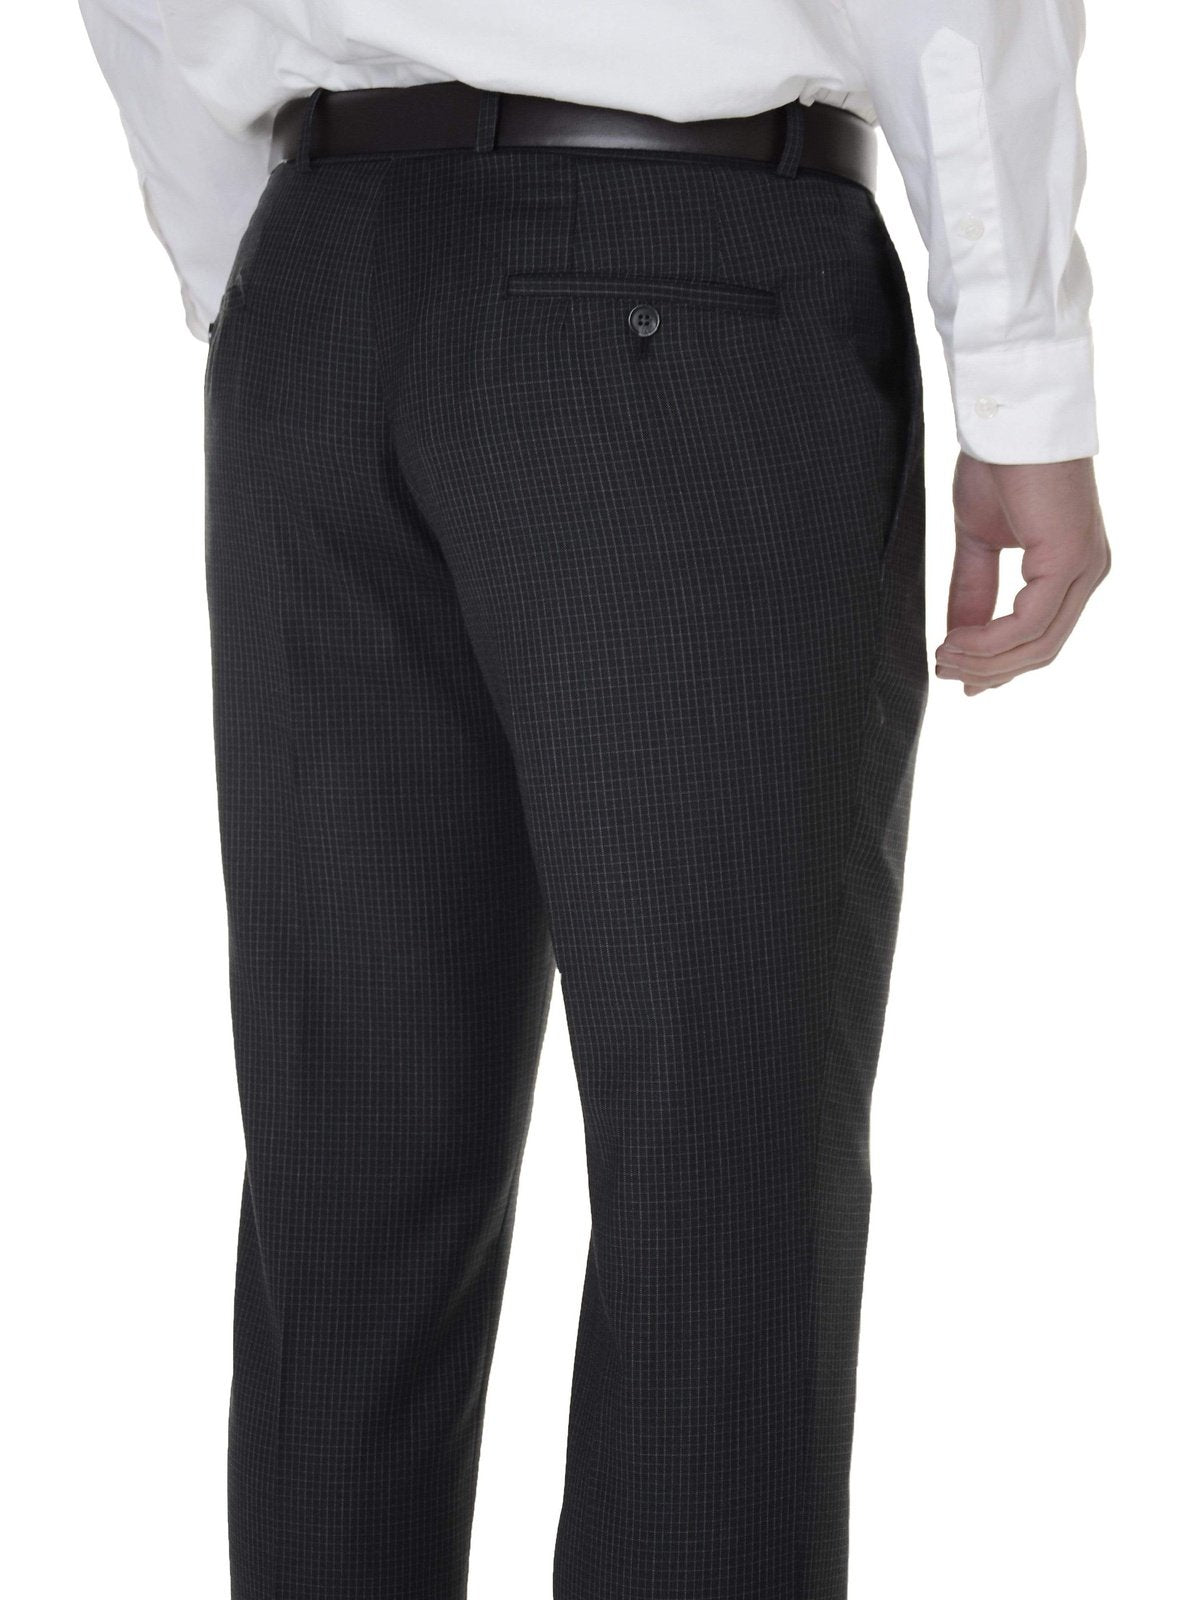 Men's Grey Plaid Tailored Fit Pants - 1913 Collection